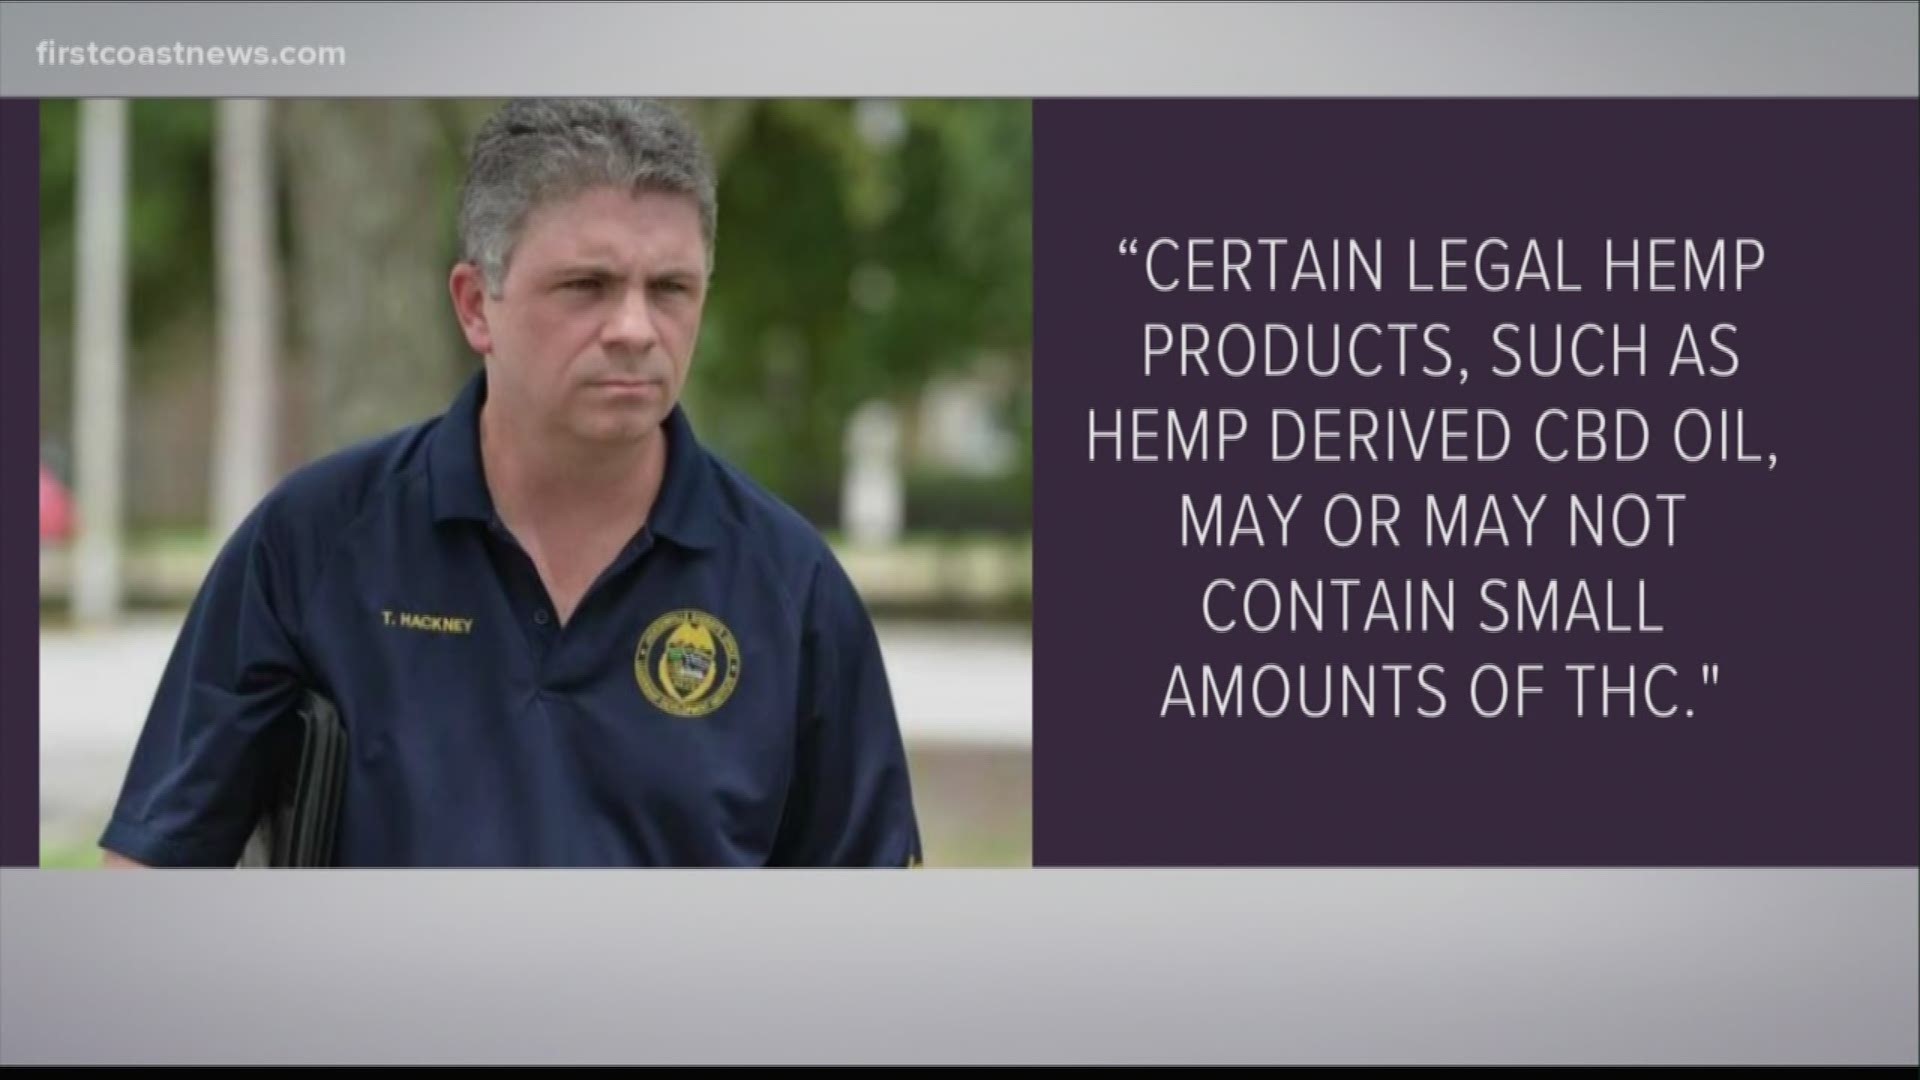 Memo cautions even trace amounts of illegal THC puts officers in violation of JSO policy